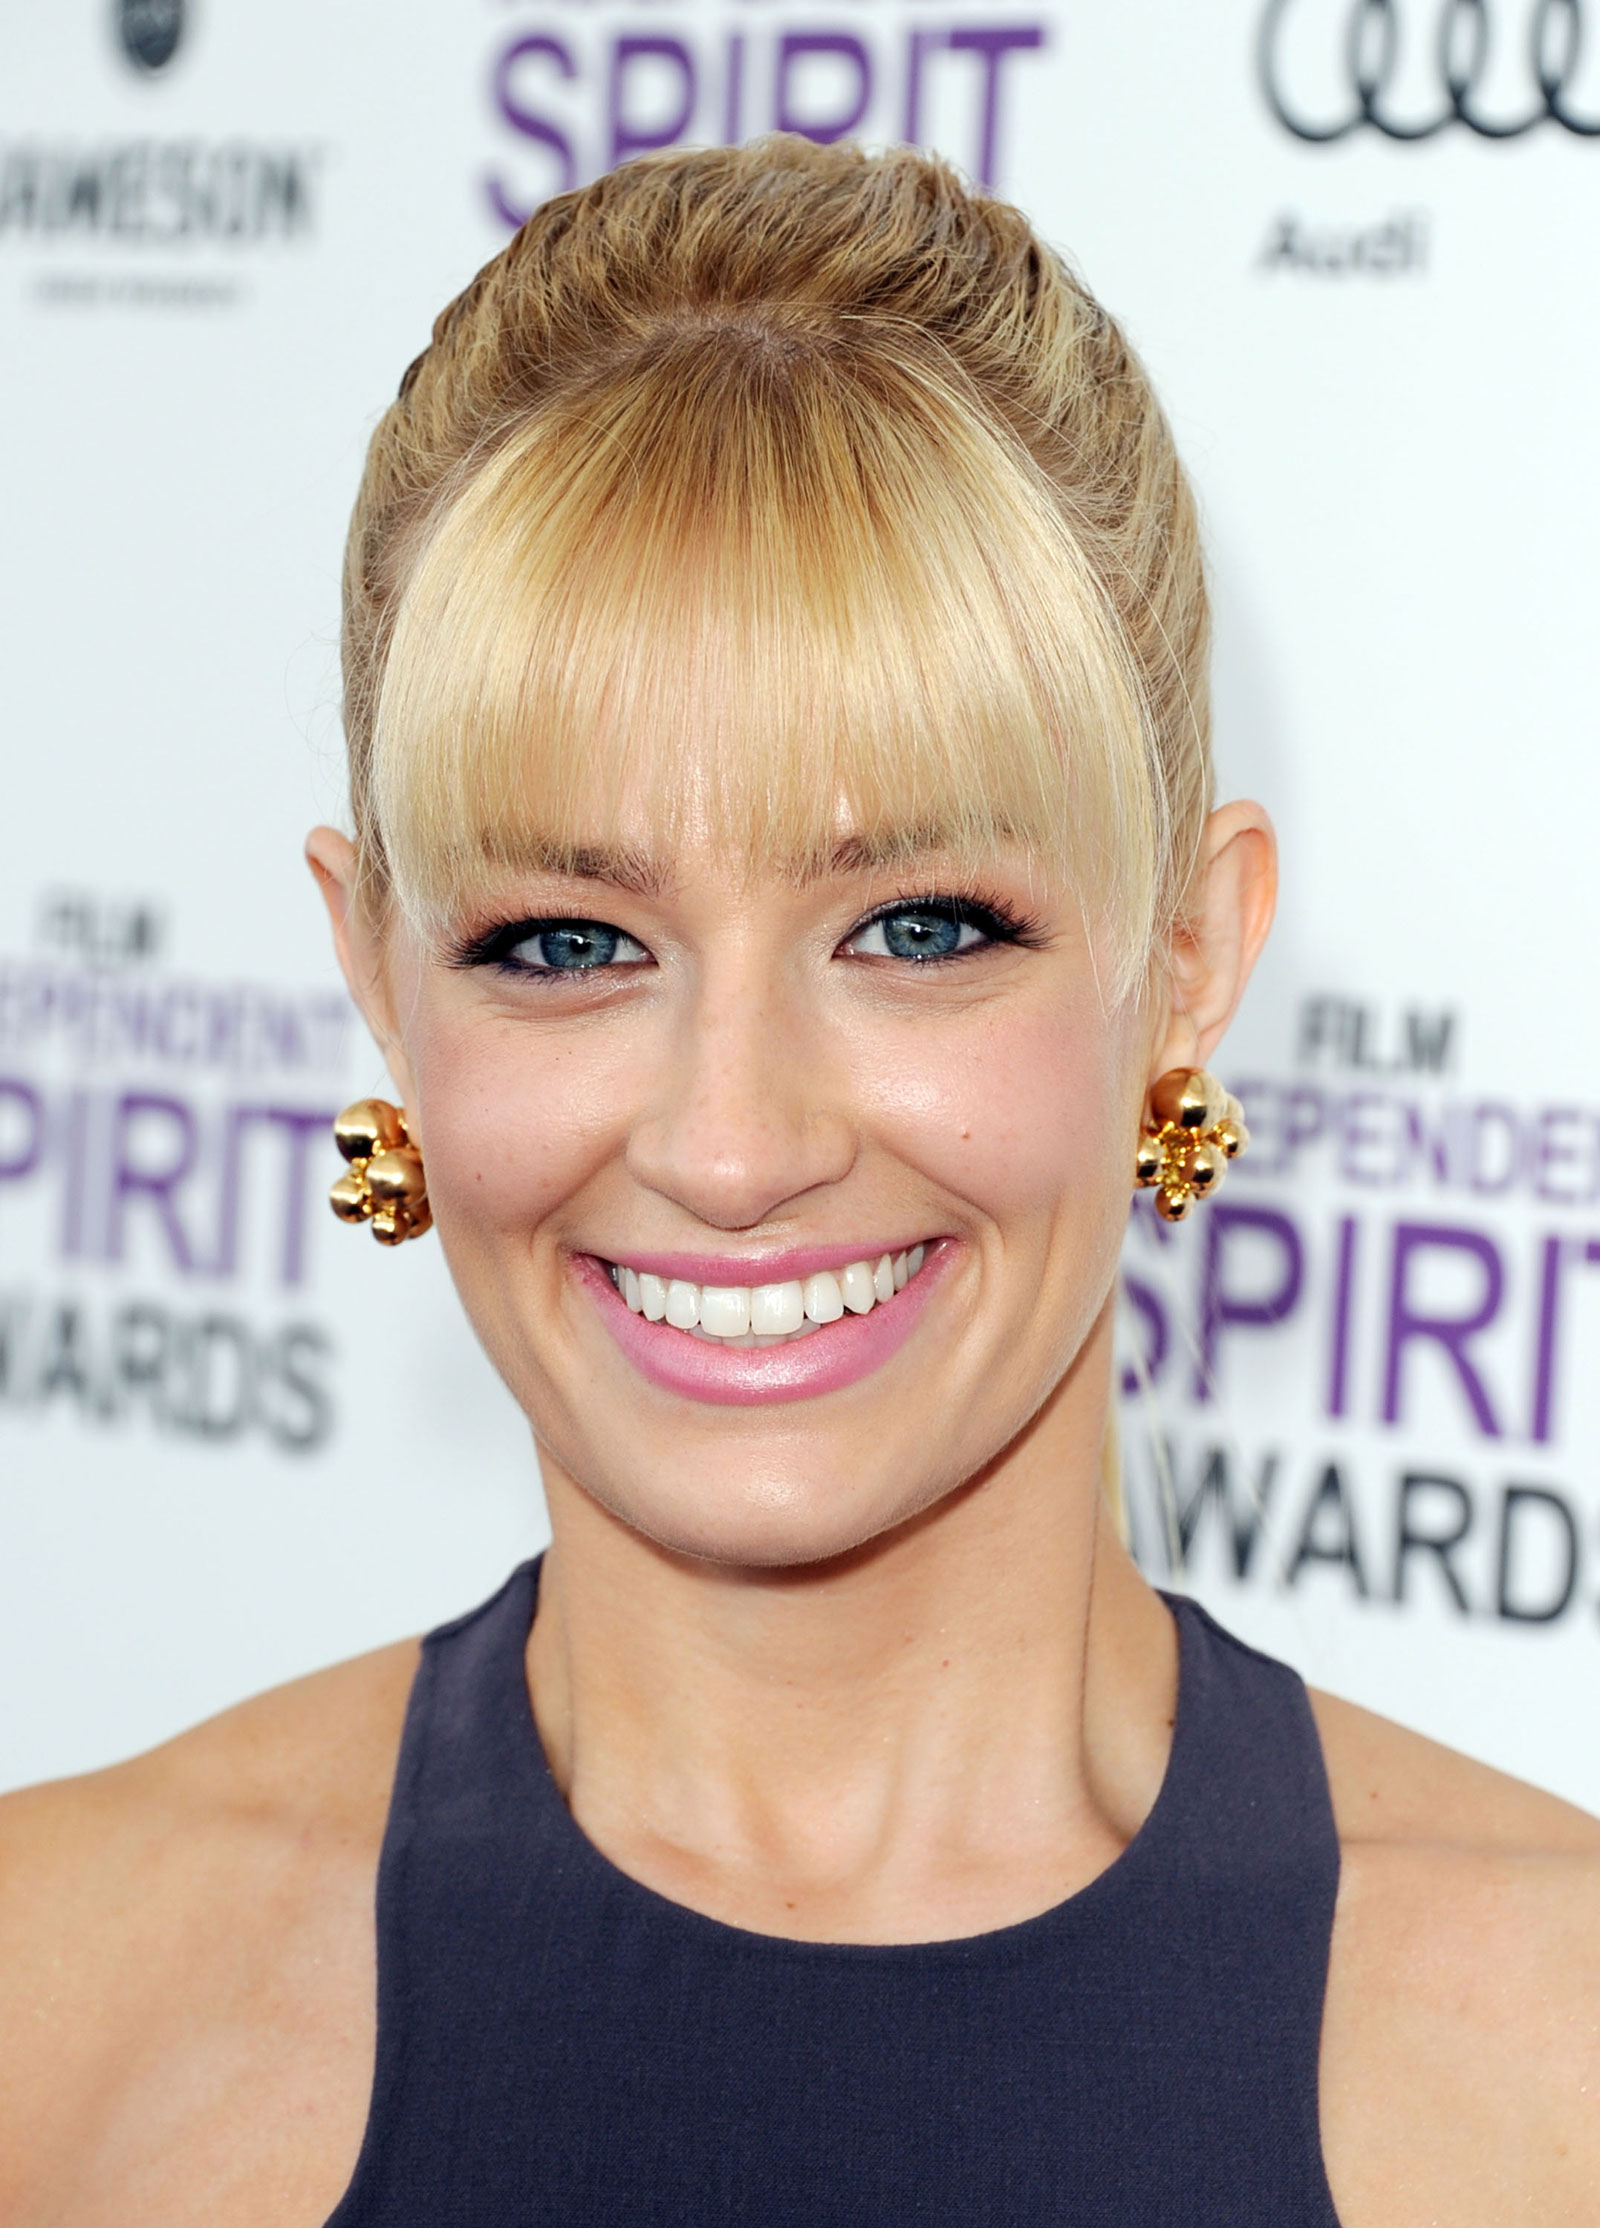 Beth Behrs At The 2012 Film Independent Spirit Awards In Santa Monica.